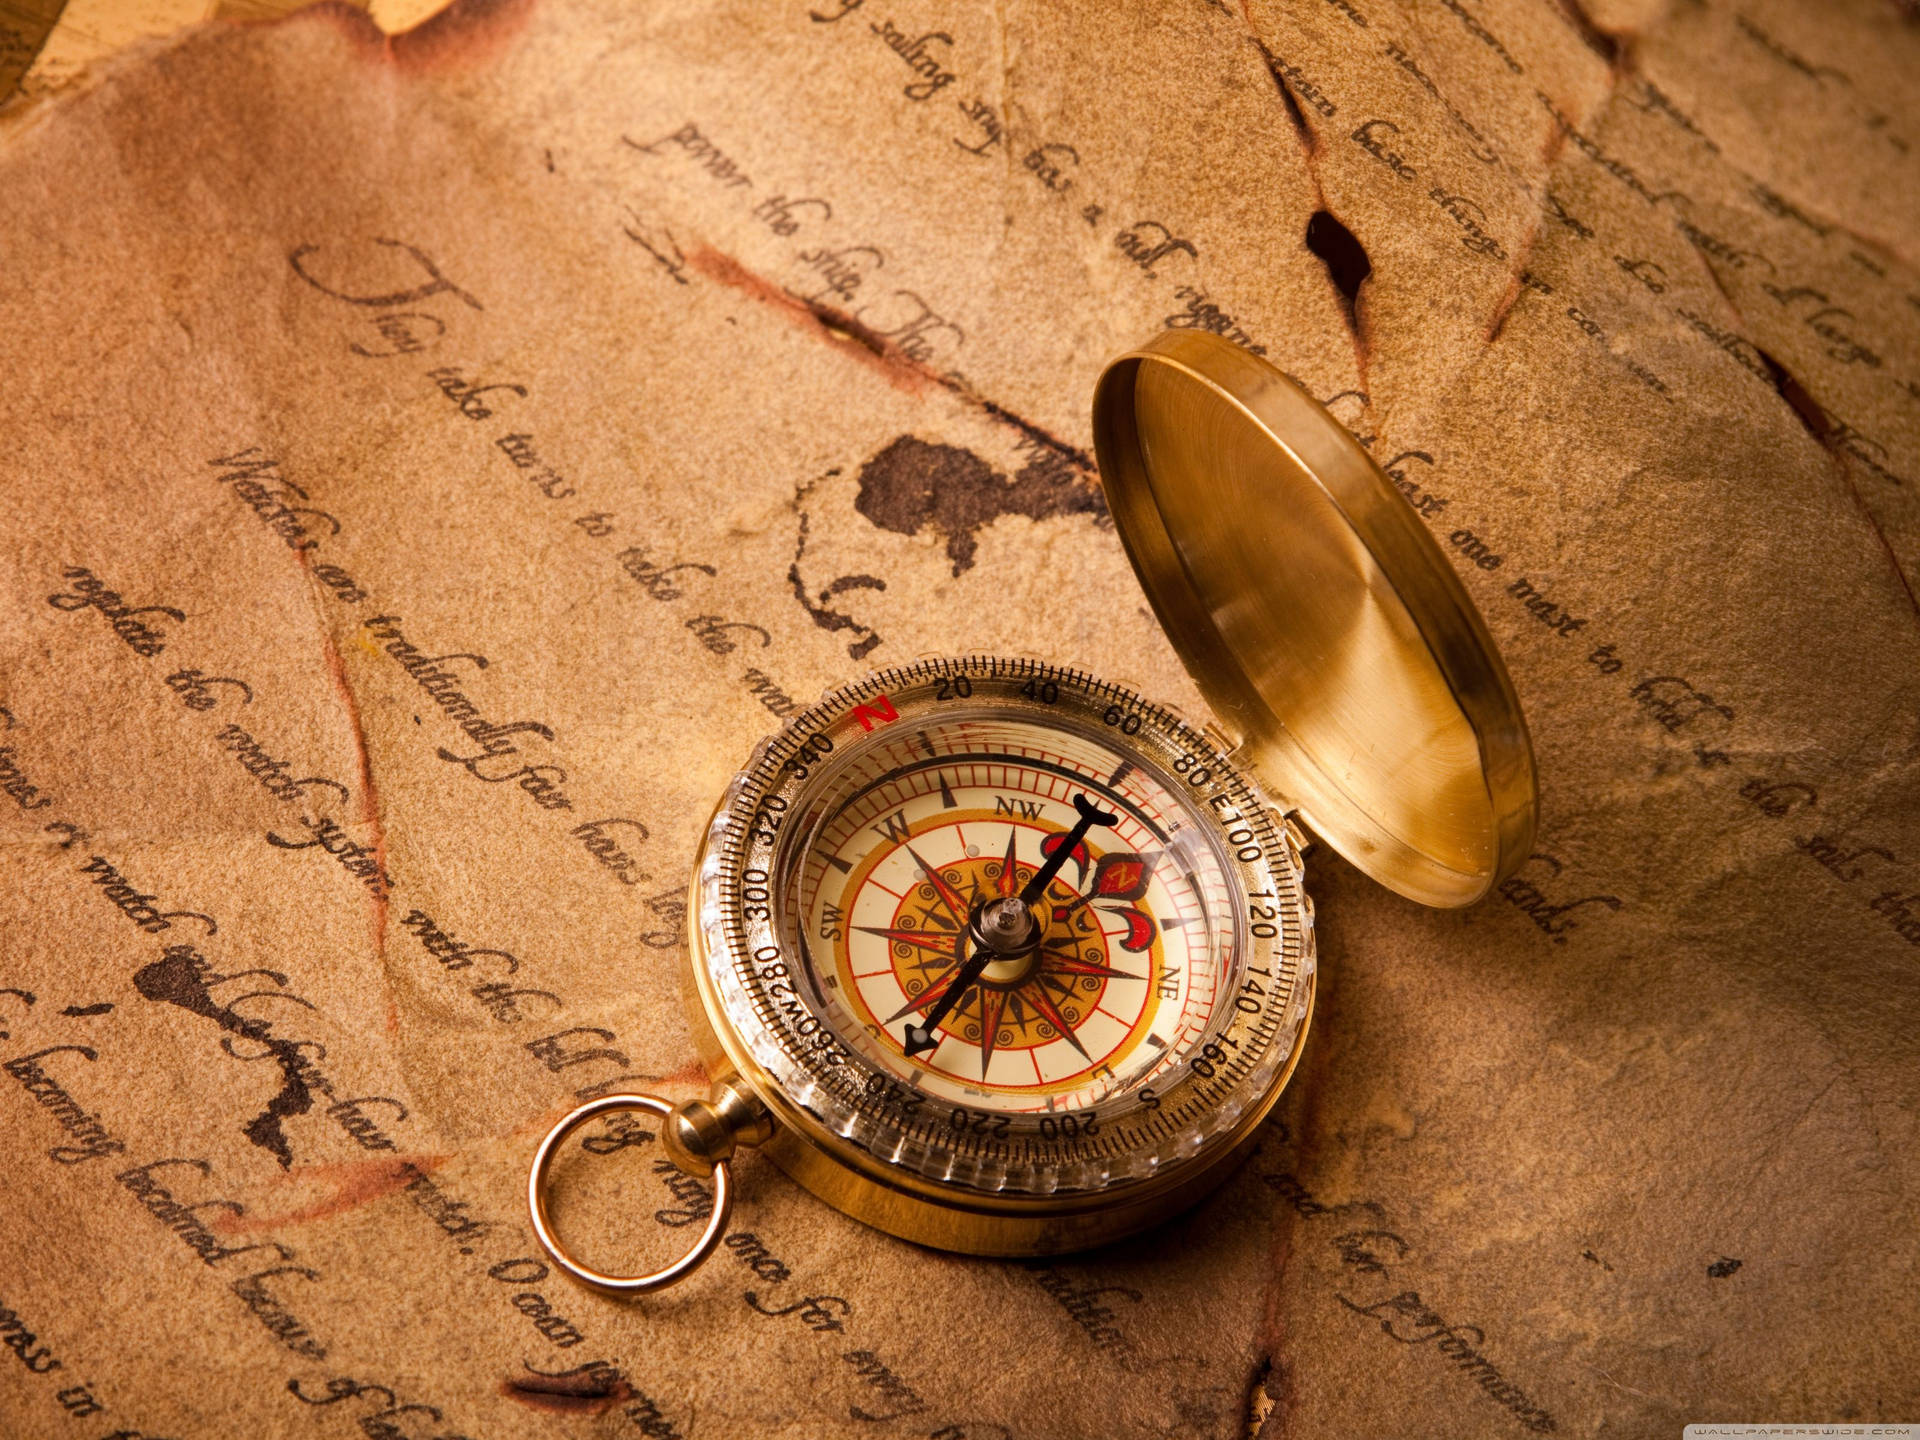 500 Compass Pictures HD  Download Free Images on Unsplash